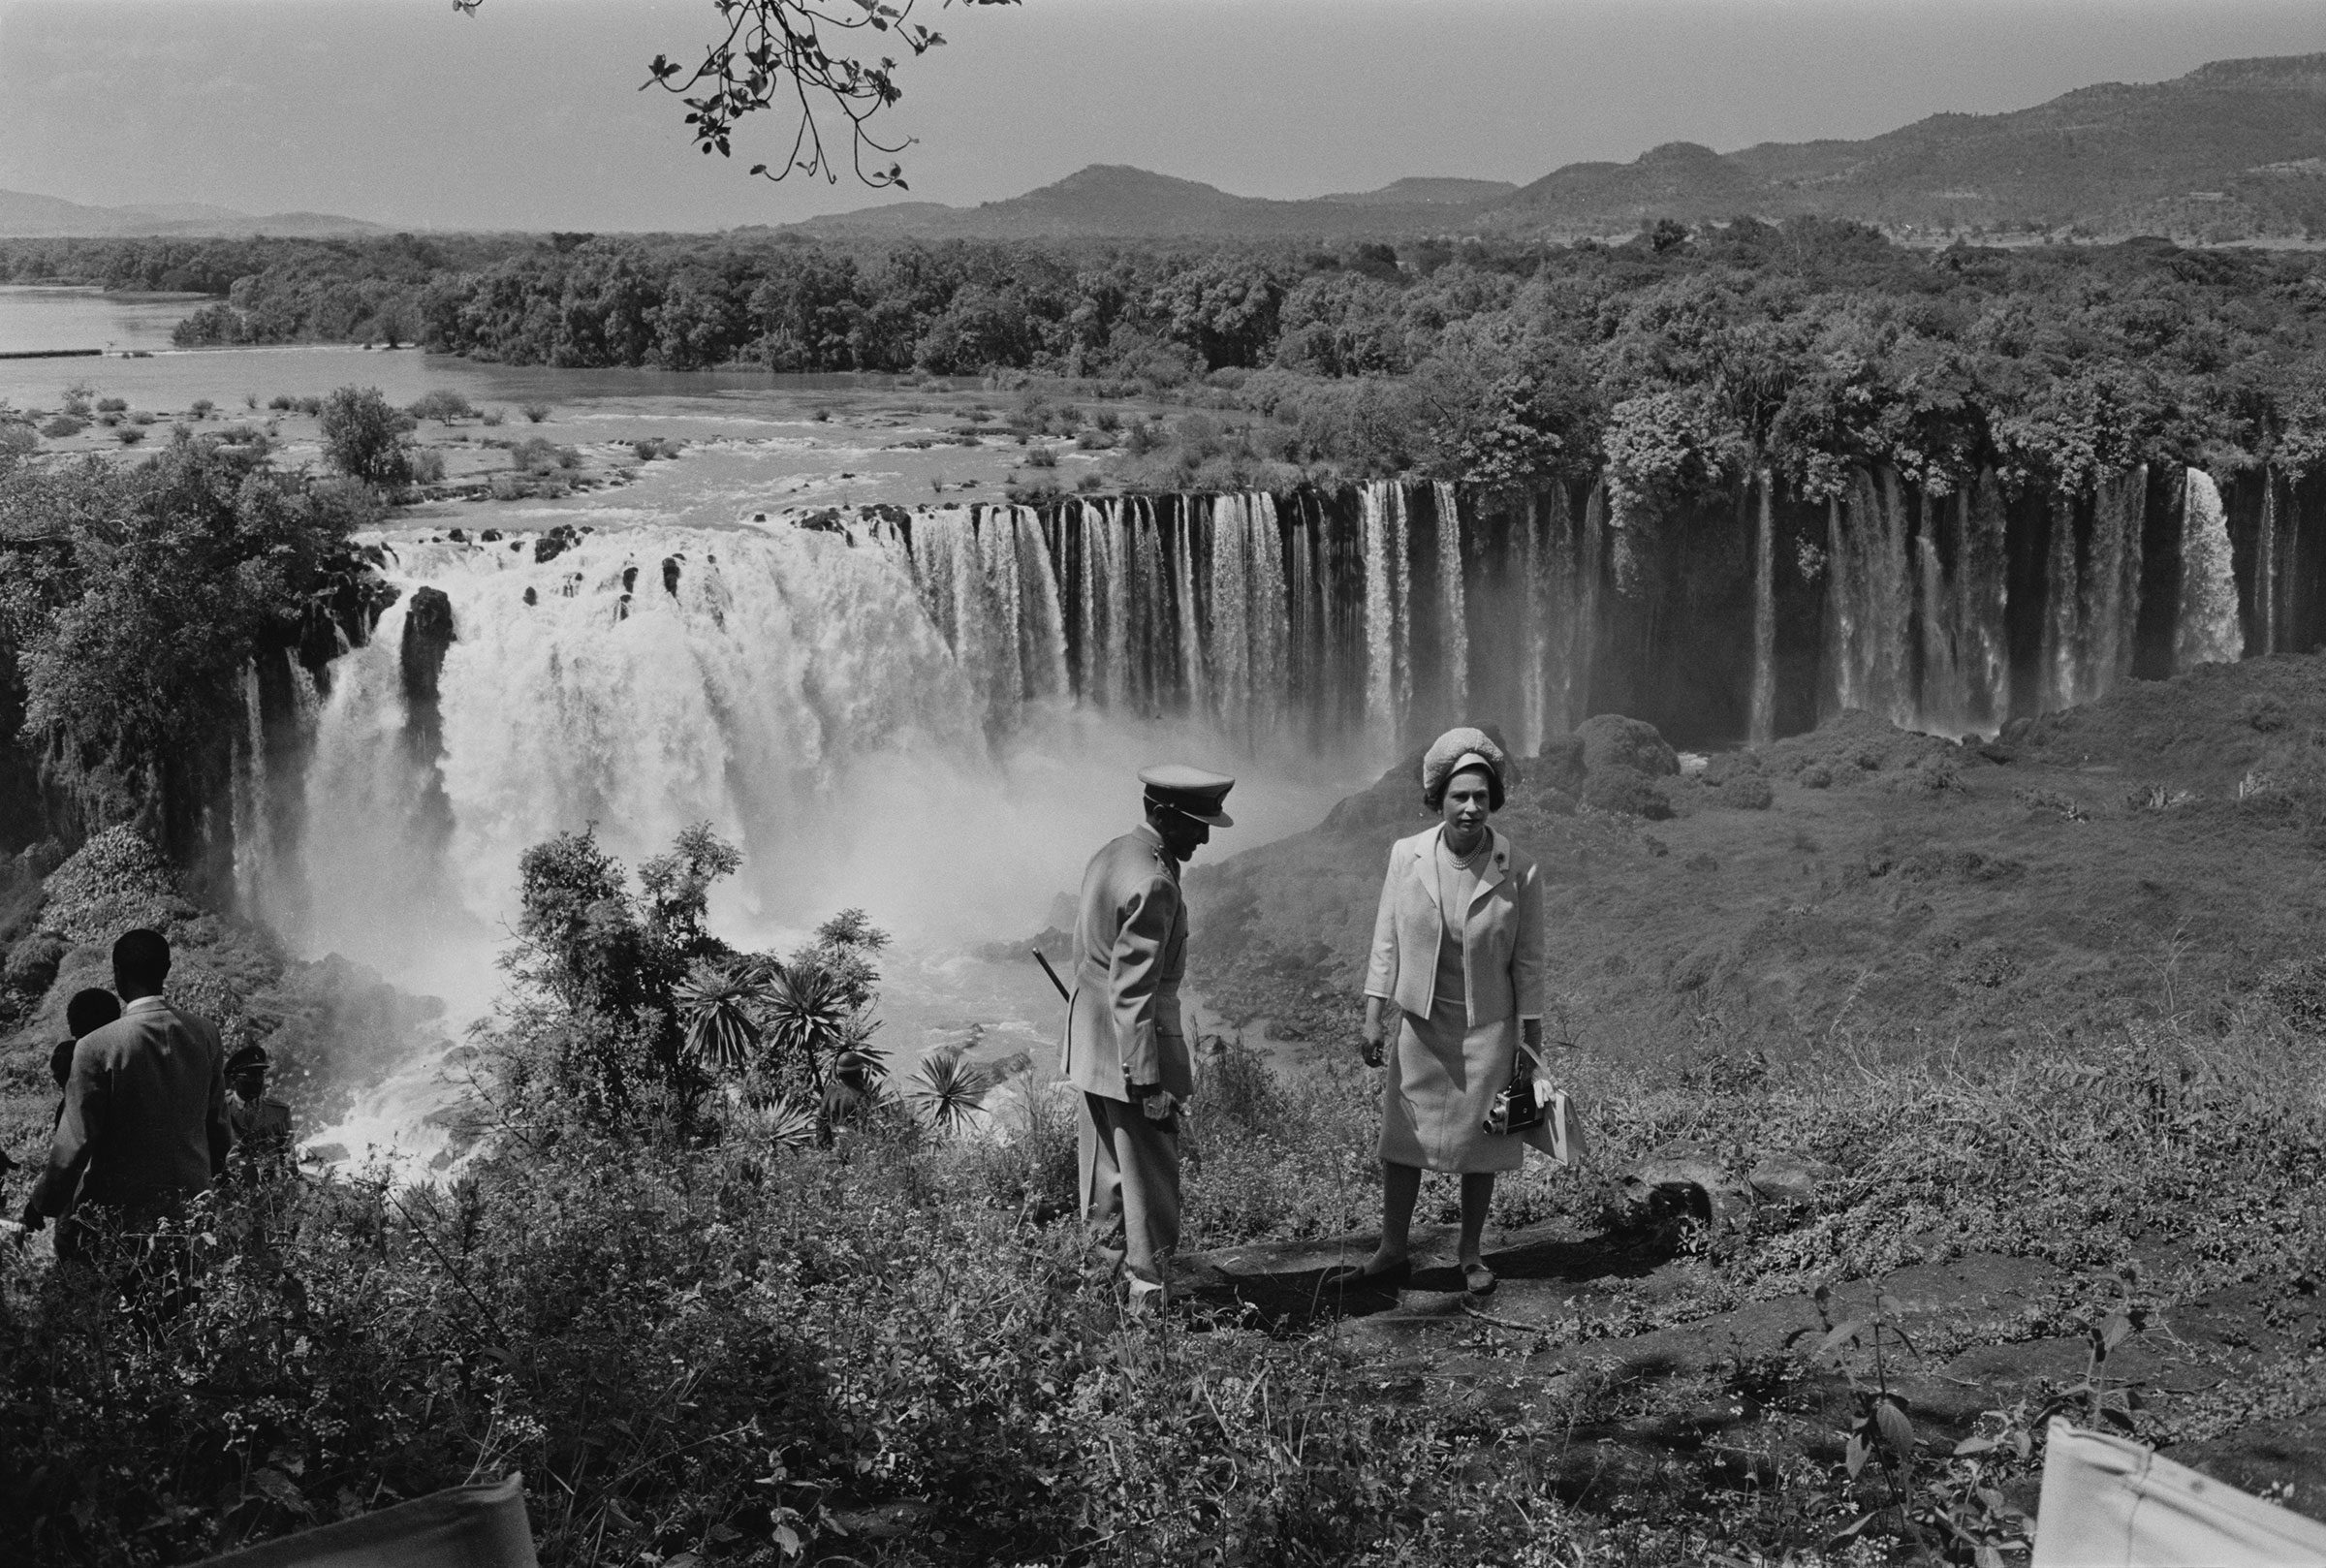 Queen Elizabeth II at the Tissisal Falls, where the Blue Nile begins, with Emperor Haile Selassie during a royal visit to Ethiopia, Feb. 7, 1965. (Terry Fincher—Daily Express/Hulton Archive/Getty Images)